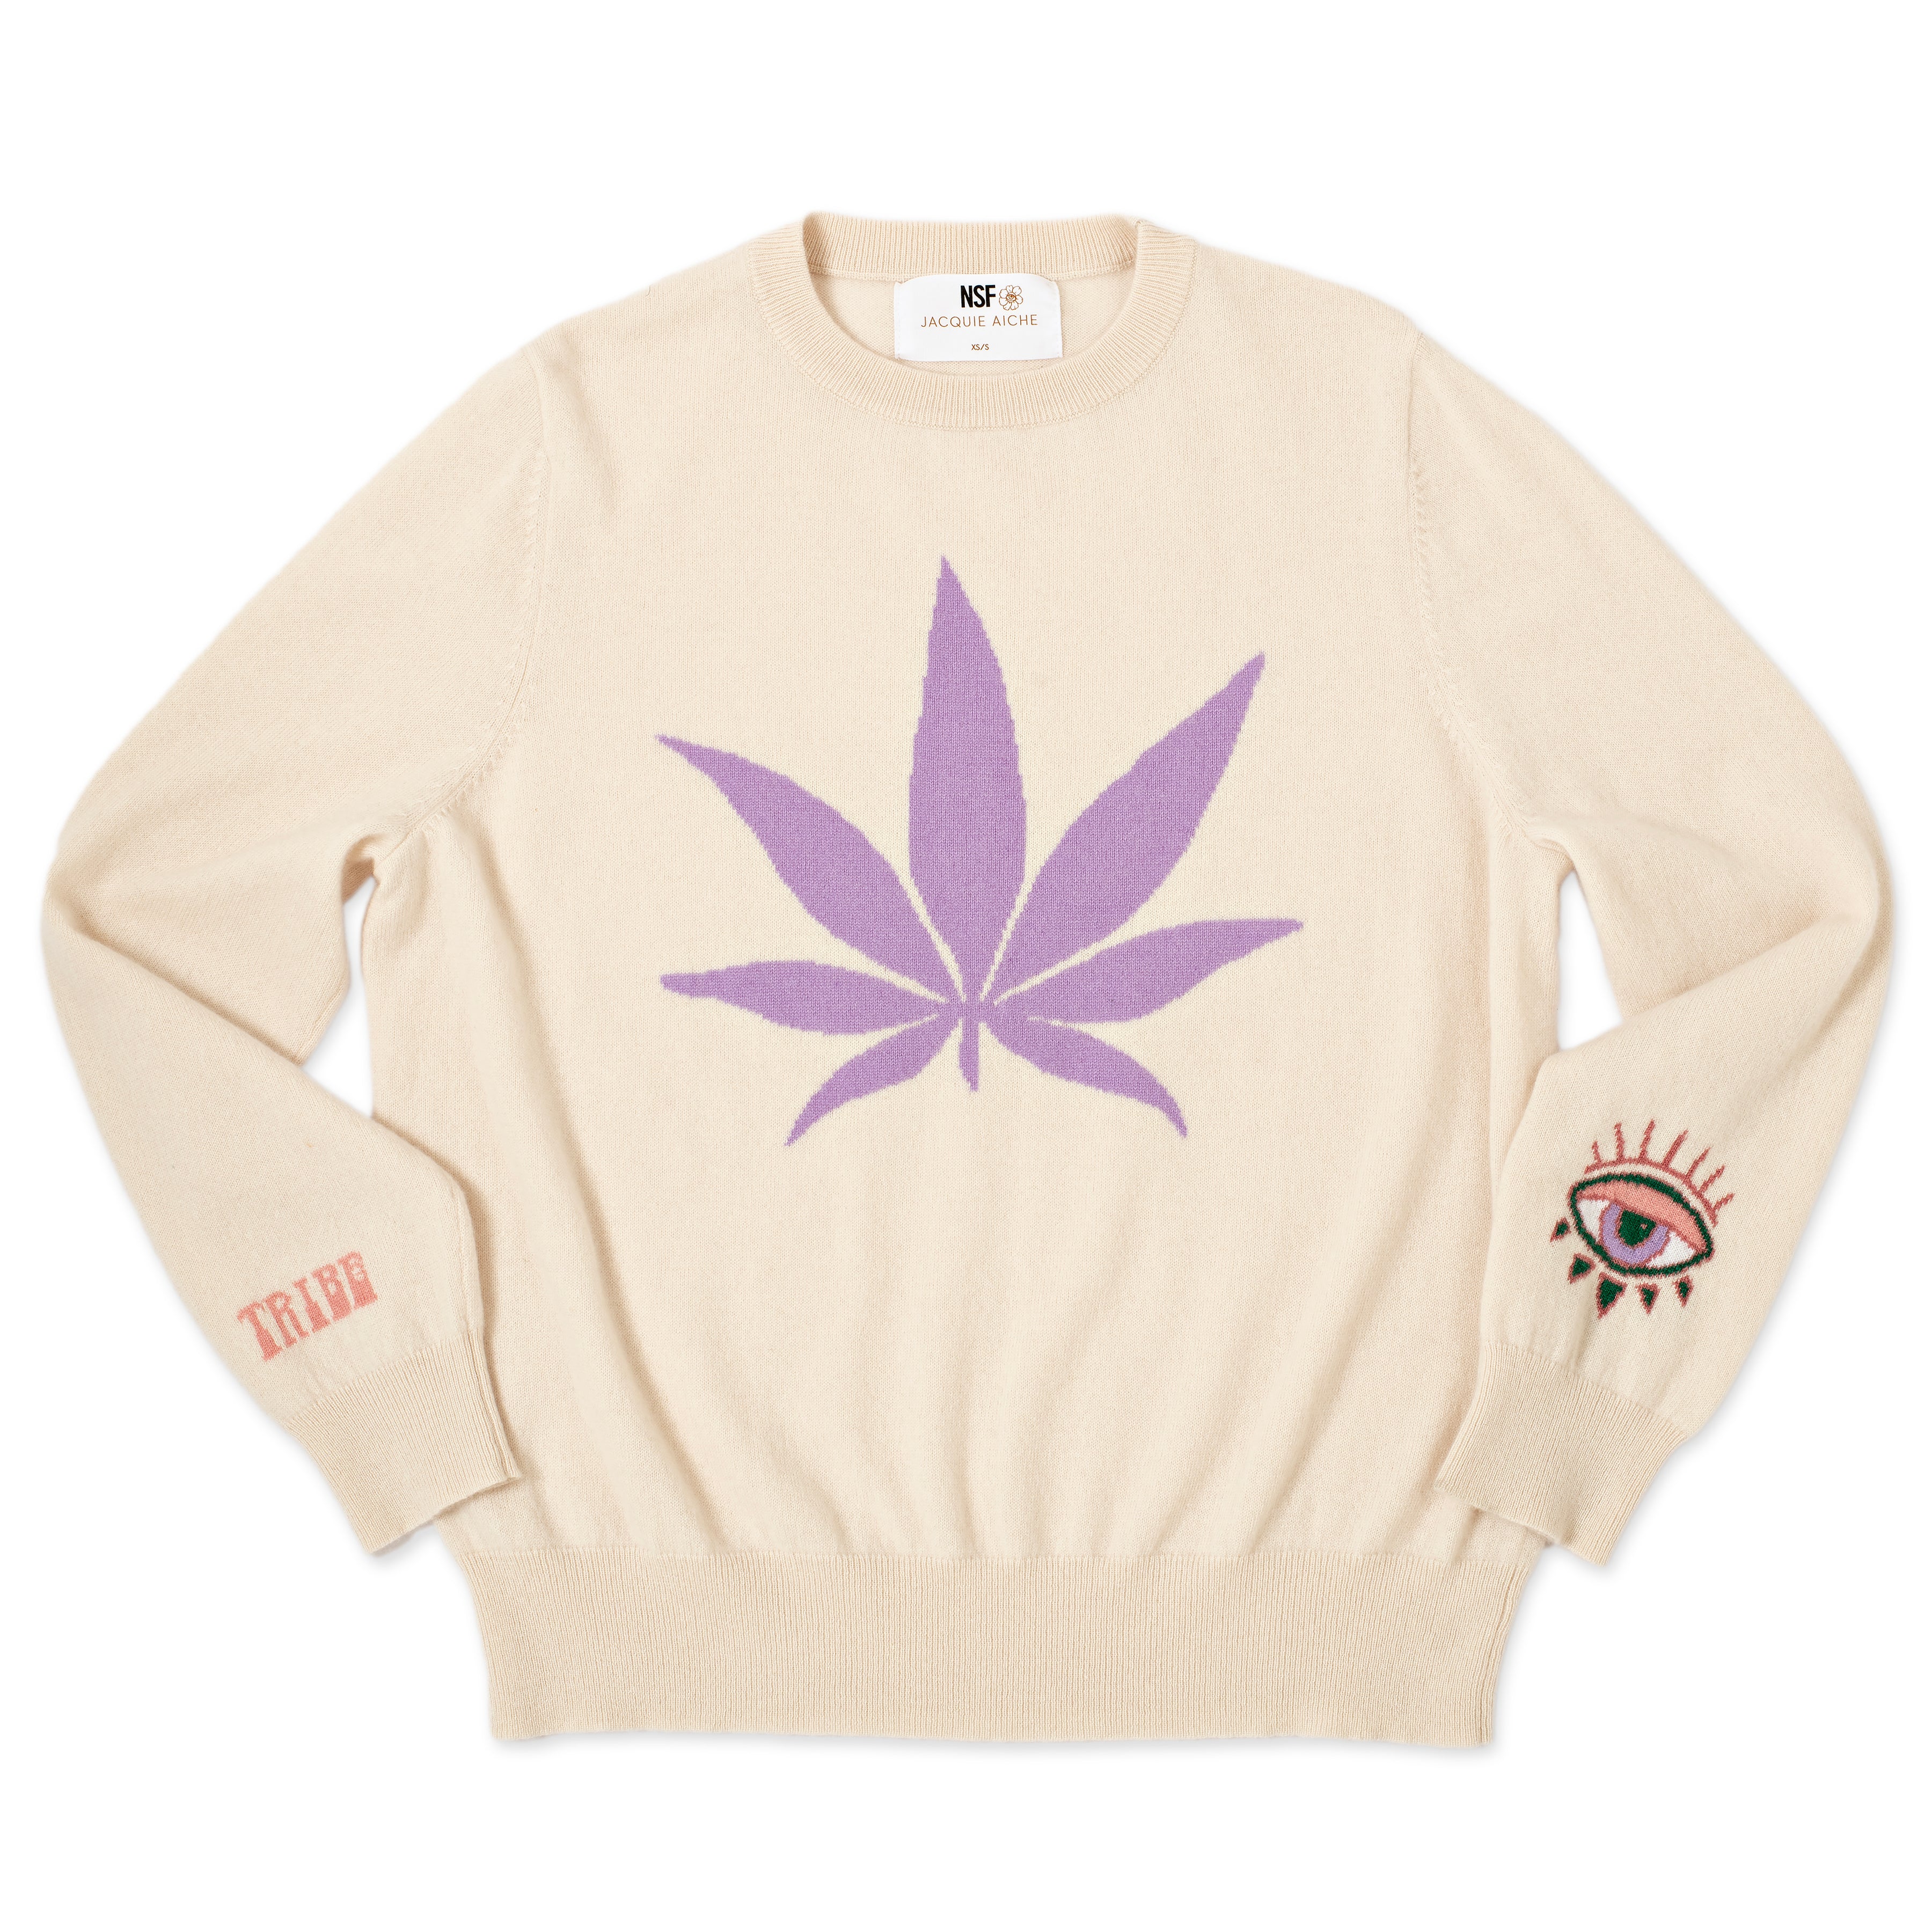 NSF x JA HIGH LIFE FEATHER CASHMERE SWEATER